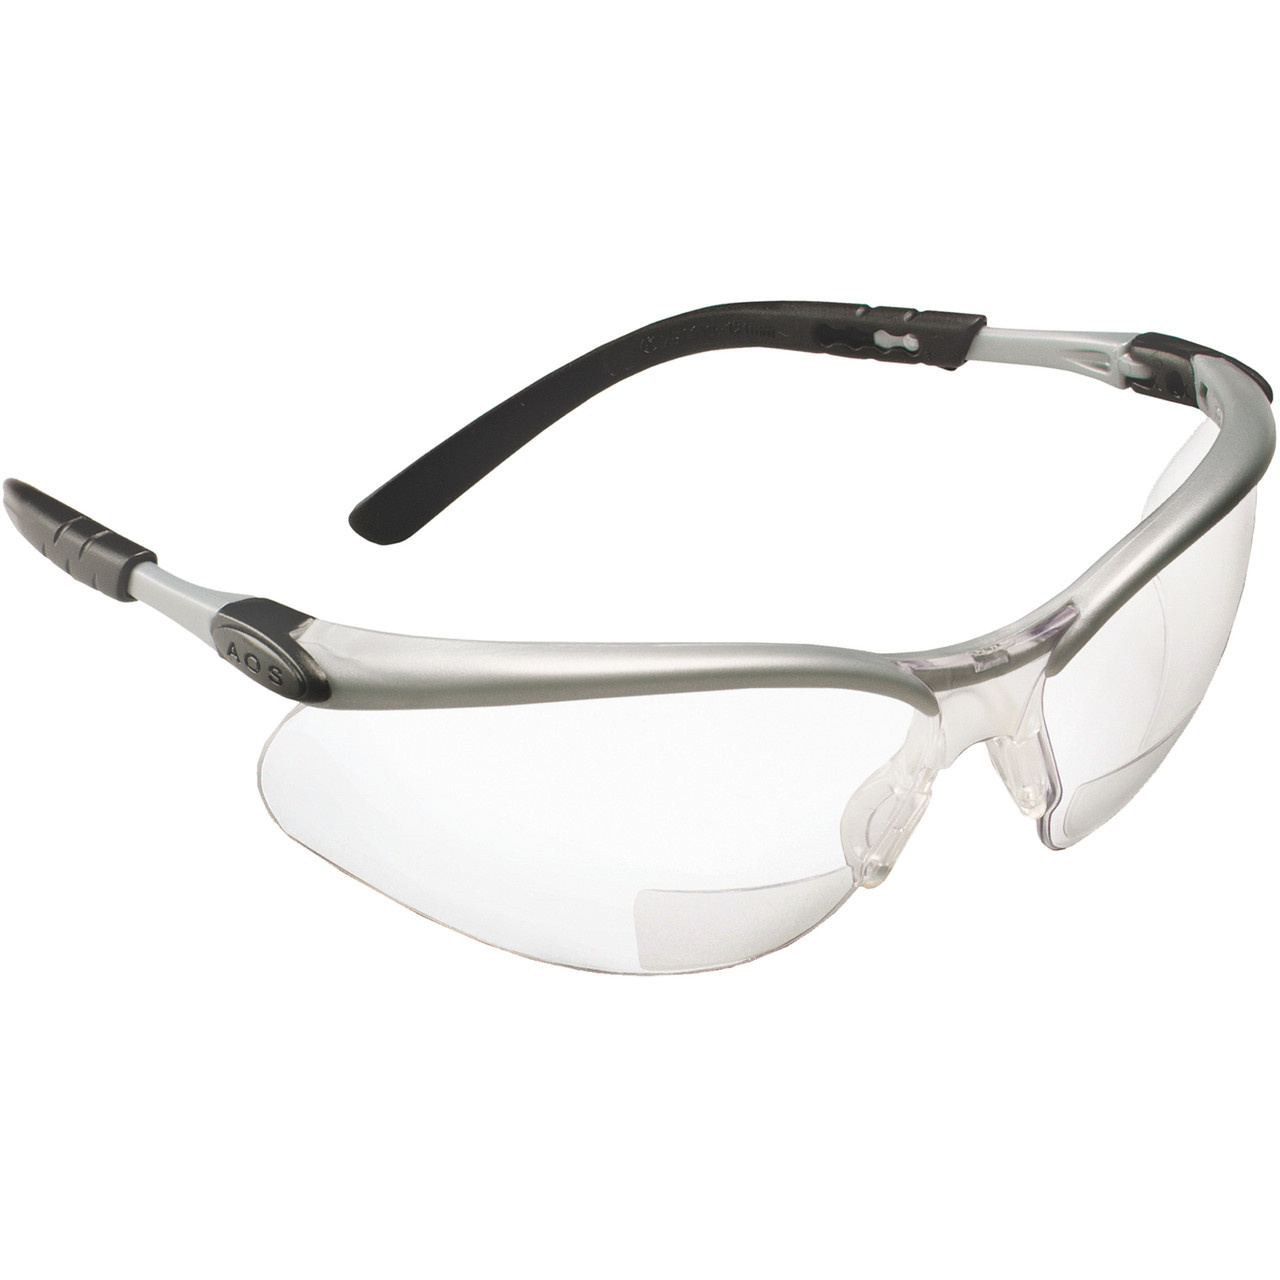 BX® Readers Safety Glasses w/Clear Lens +1.5 Diopter  11374-00000-20